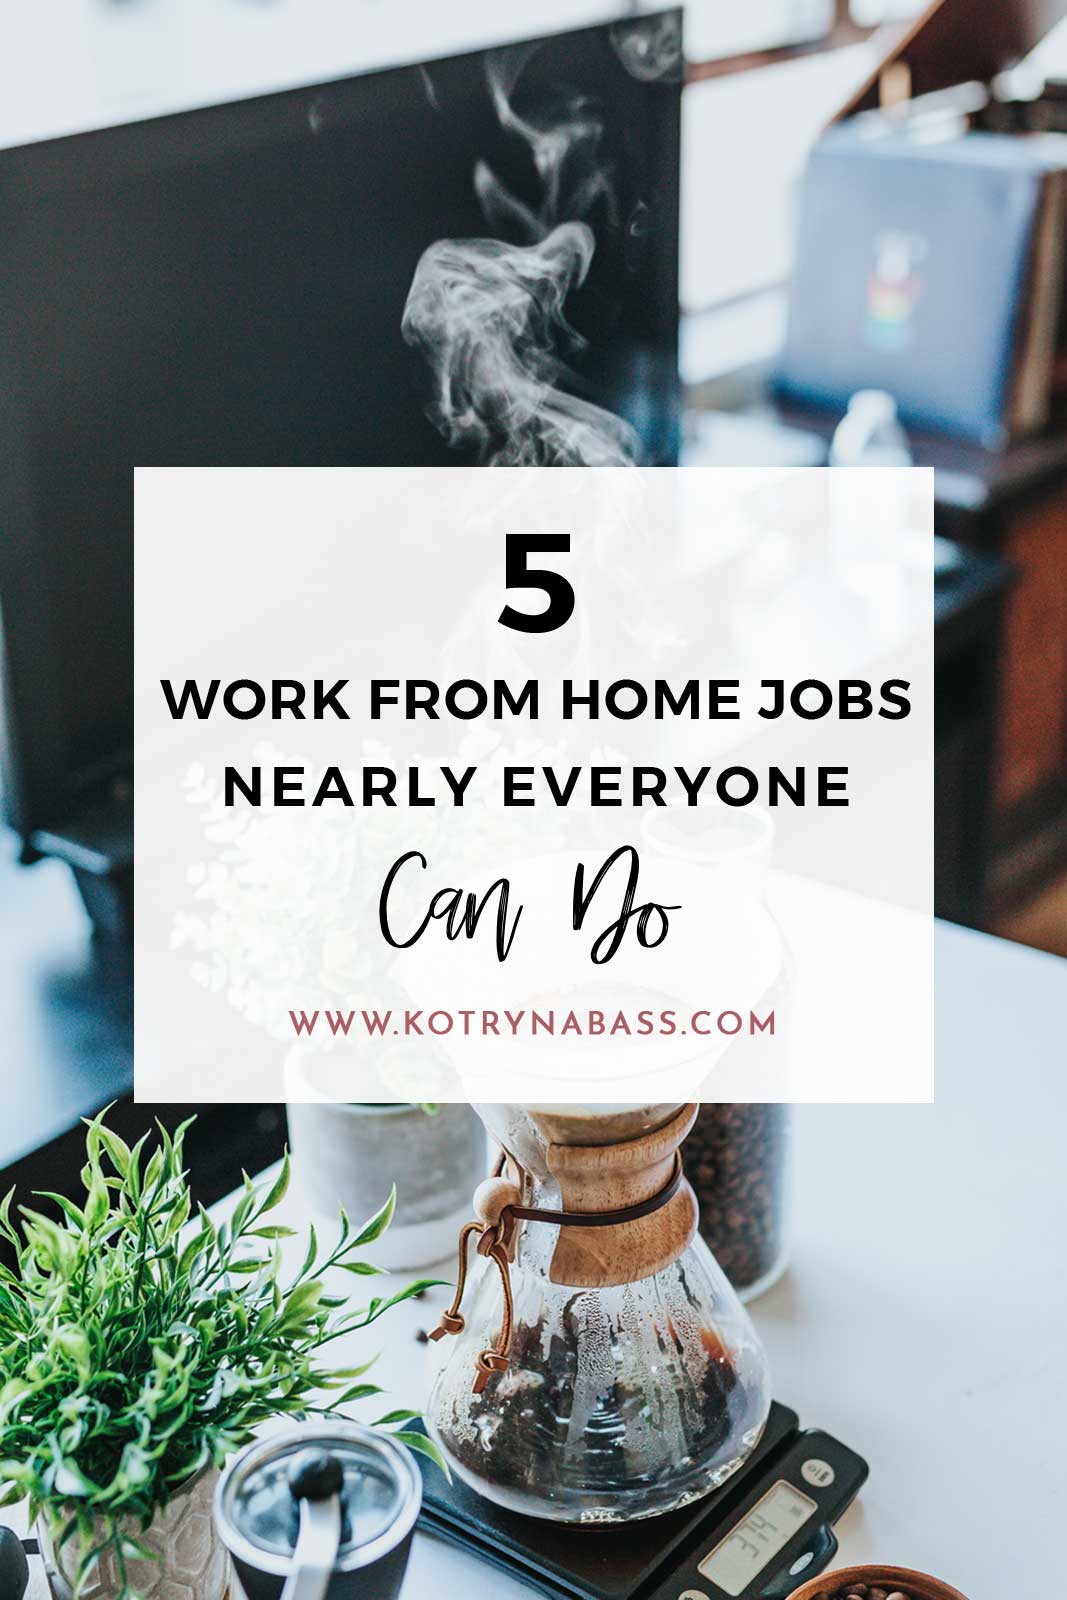 None of the jobs mentioned below requires any special skills and you can learn everything along the way as you go along. Here, I also mention a few very useful resources that will help you start everything from scratch, so you don't even need to do any extra research! Click Through to find 5 Work From Home Jobs Nearly Everyone Can Do.